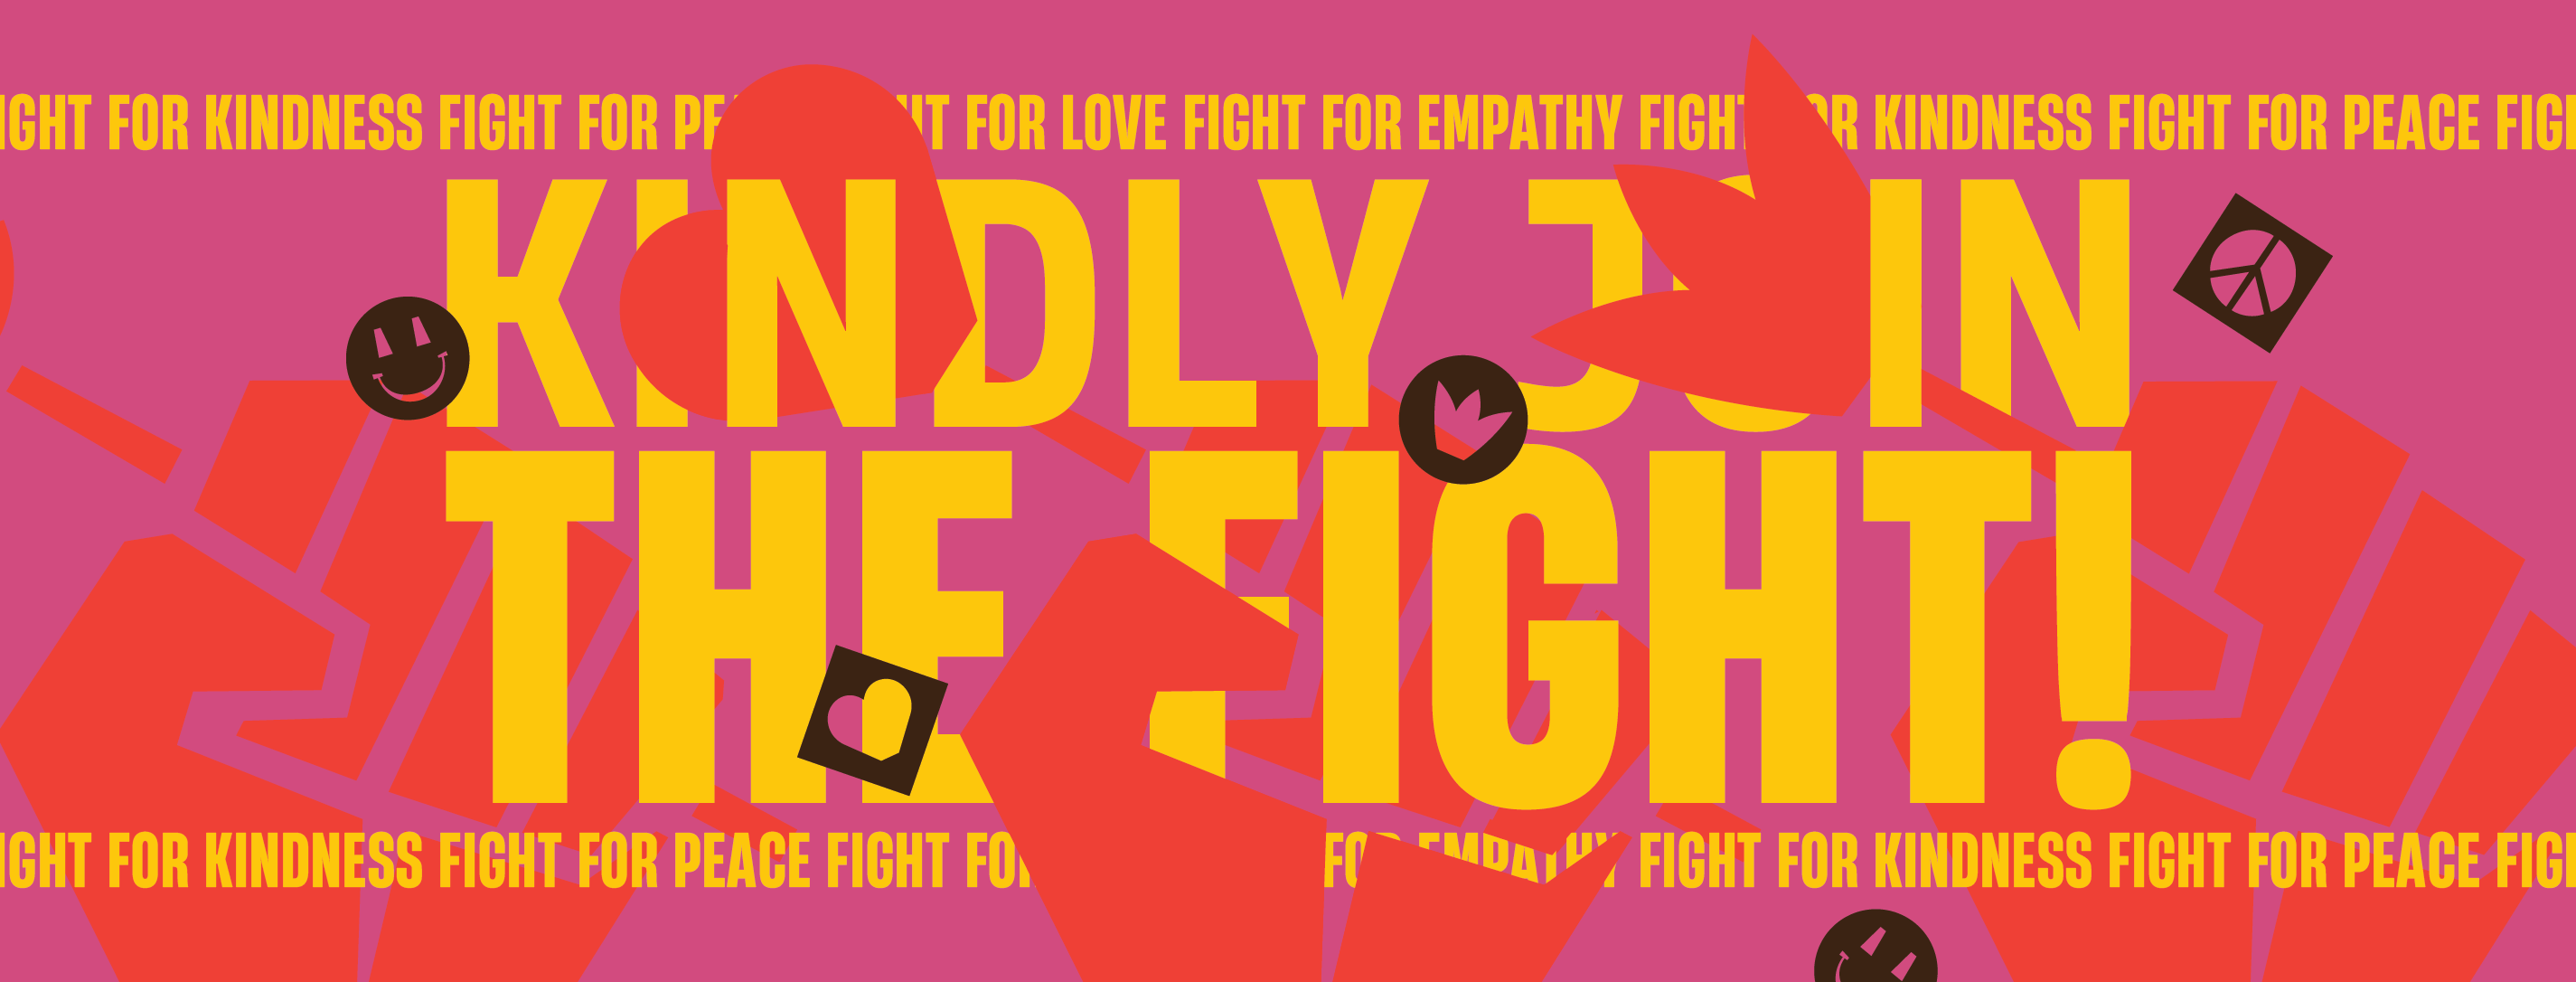 Fight for Kindness